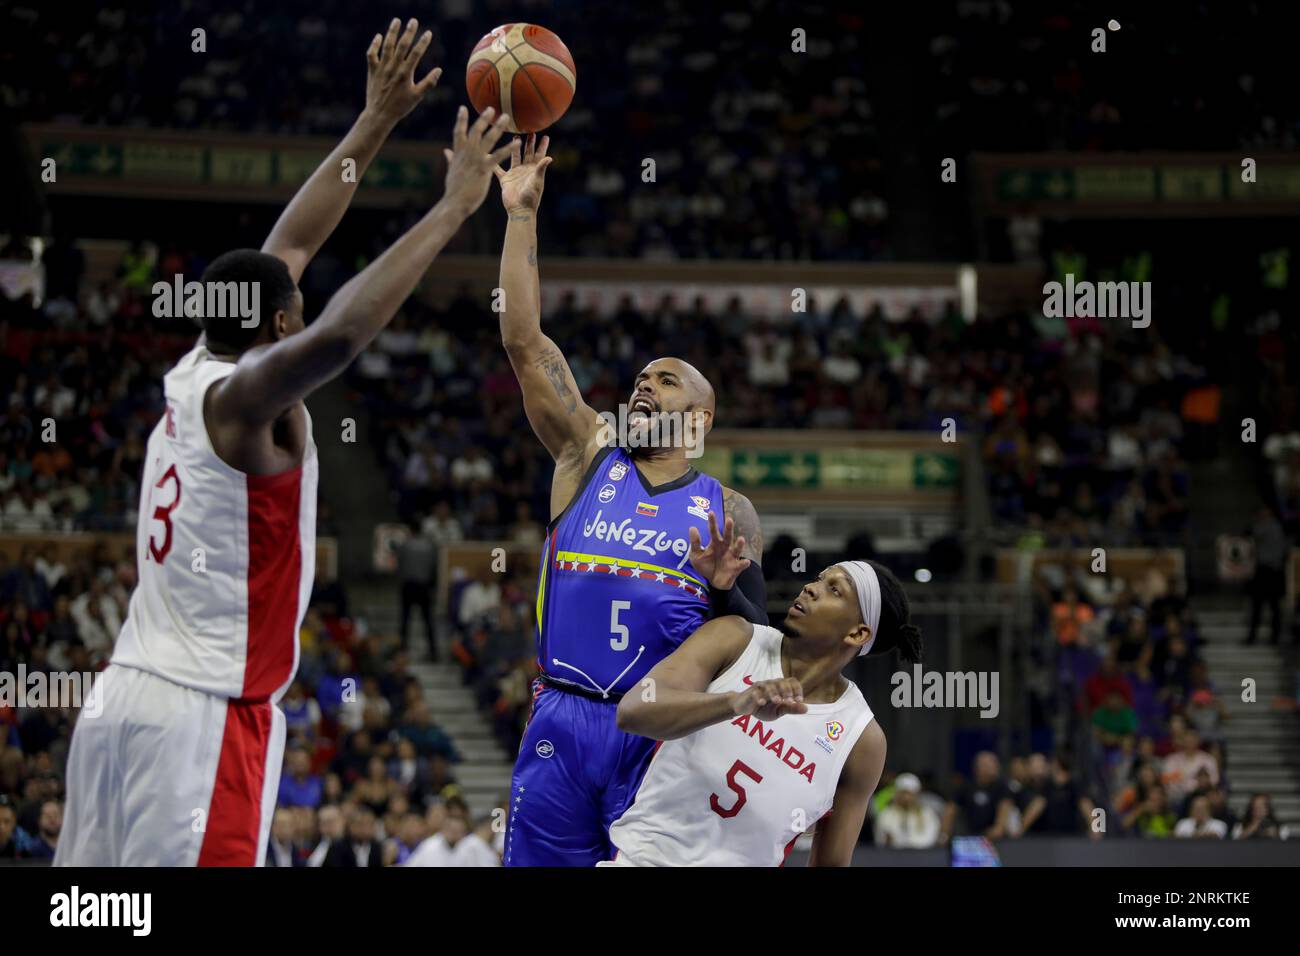 CARACAS, VENEZUELA - FEBRUARY 26: Gregory Vargas of Venezuela shoots to score against Canada during the Americas qualifiers for the FIBA Basketball World Cup 2023 basketball game, at Poliedro de Caracas, in Caracas, Venezuela, on February 26, 2023. (Photo by Pedro Rances Mattey/Pximages) Credit: Px Images/Alamy Live News Stock Photo